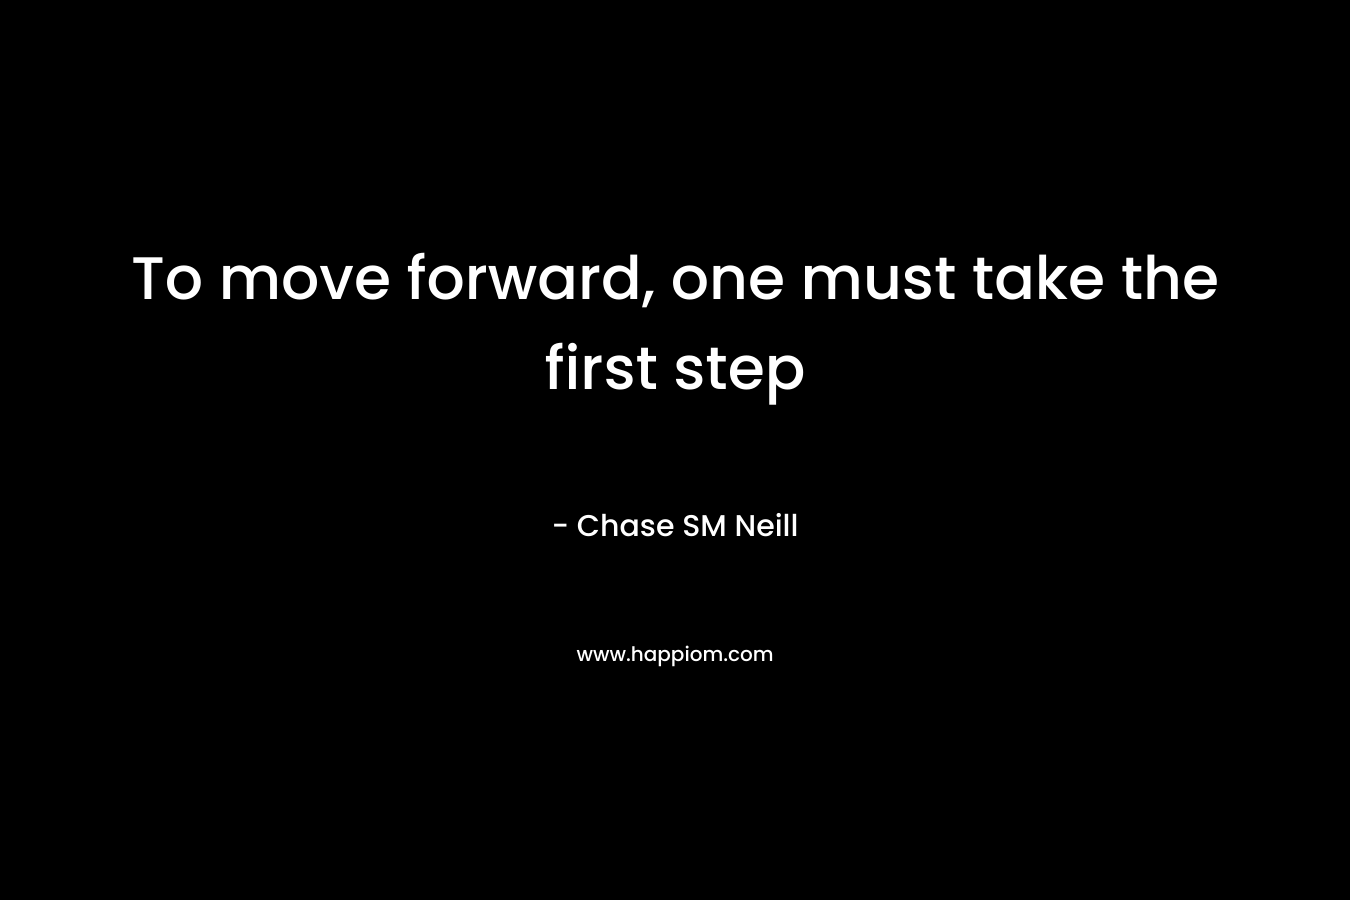 To move forward, one must take the first step